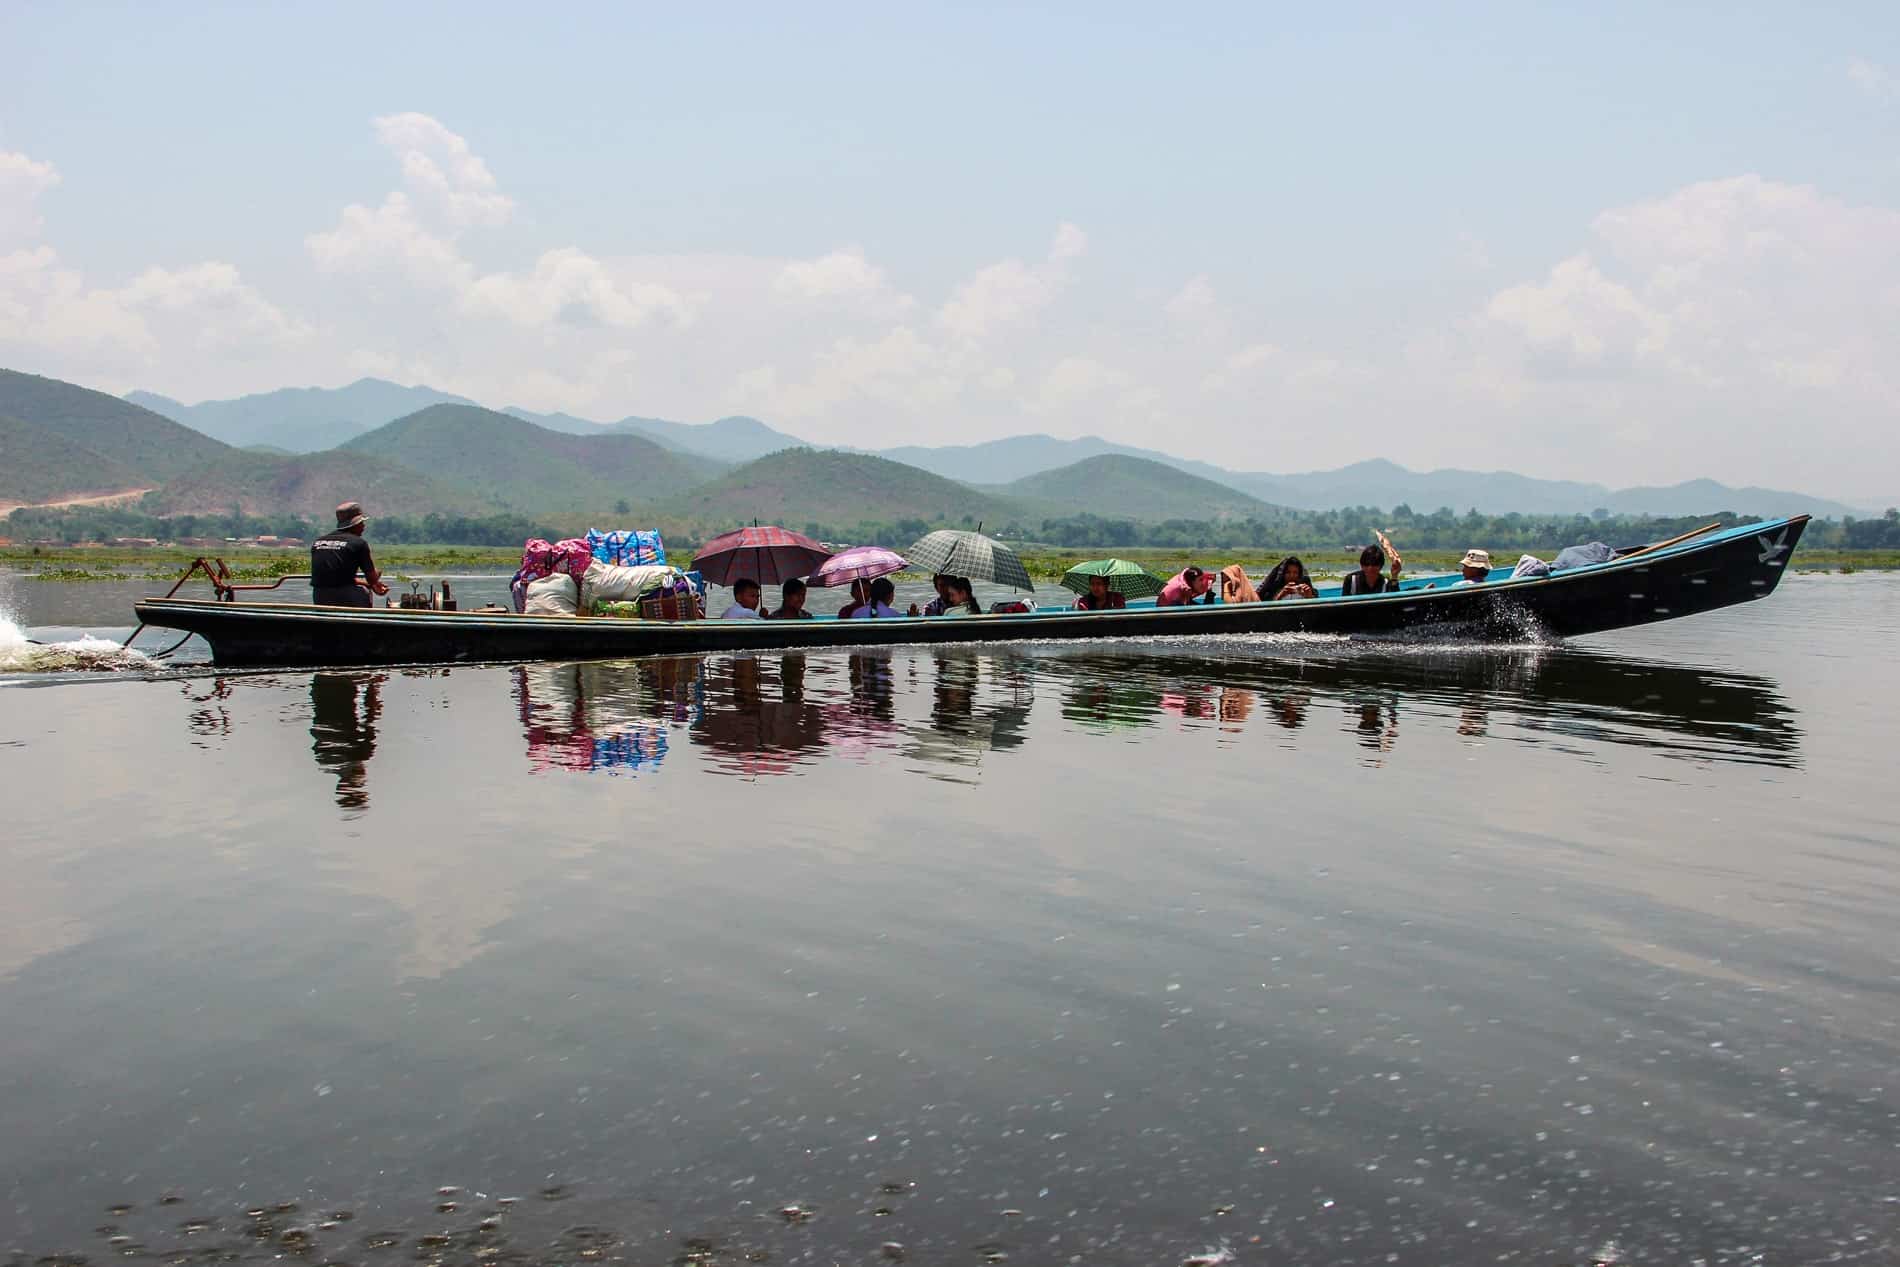 A line of people holding colourful umbrellas in a longboat, being transported across the waters of a large reservoir.